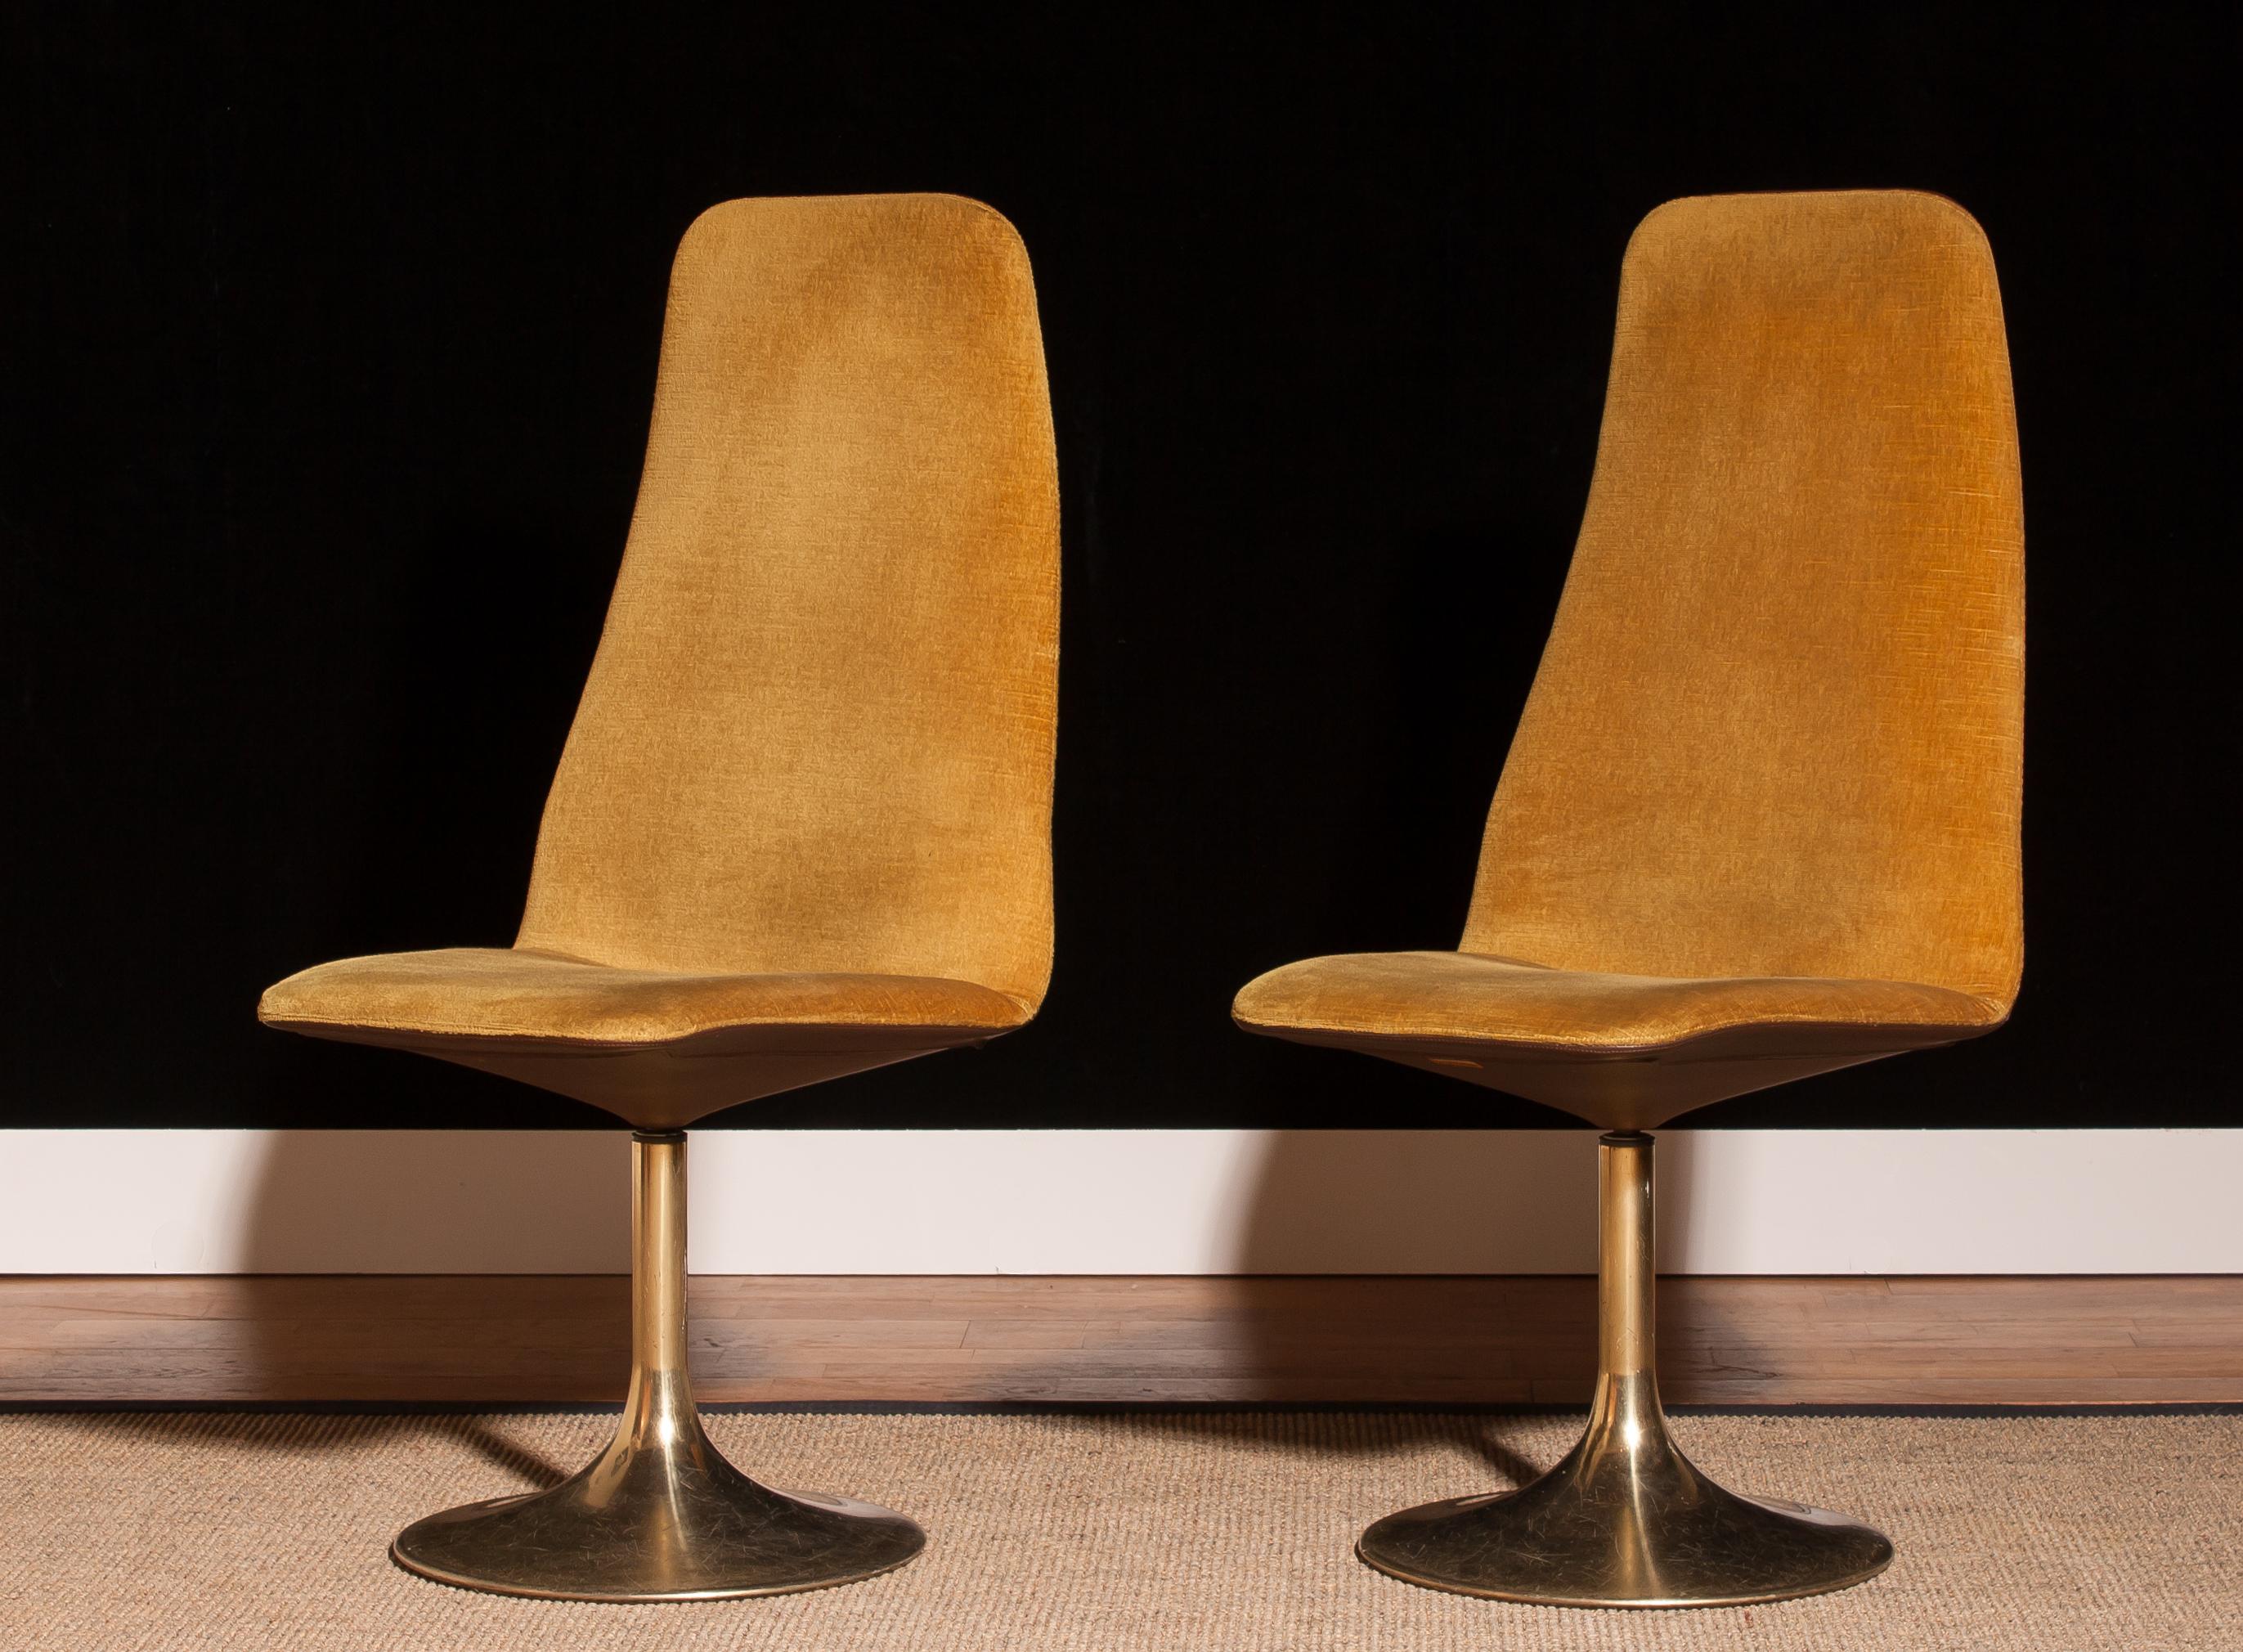 Very nice pair of swivel chairs by Johanson design for Markaryd Sweden.
The chairs have a brass tulip swivel feet with golden velour and faux leather upholstery.
They are labelled.
Period 1970s.
Dimensions: H 102 cm, W 50 cm, D 48 cm, SH 44 cm.